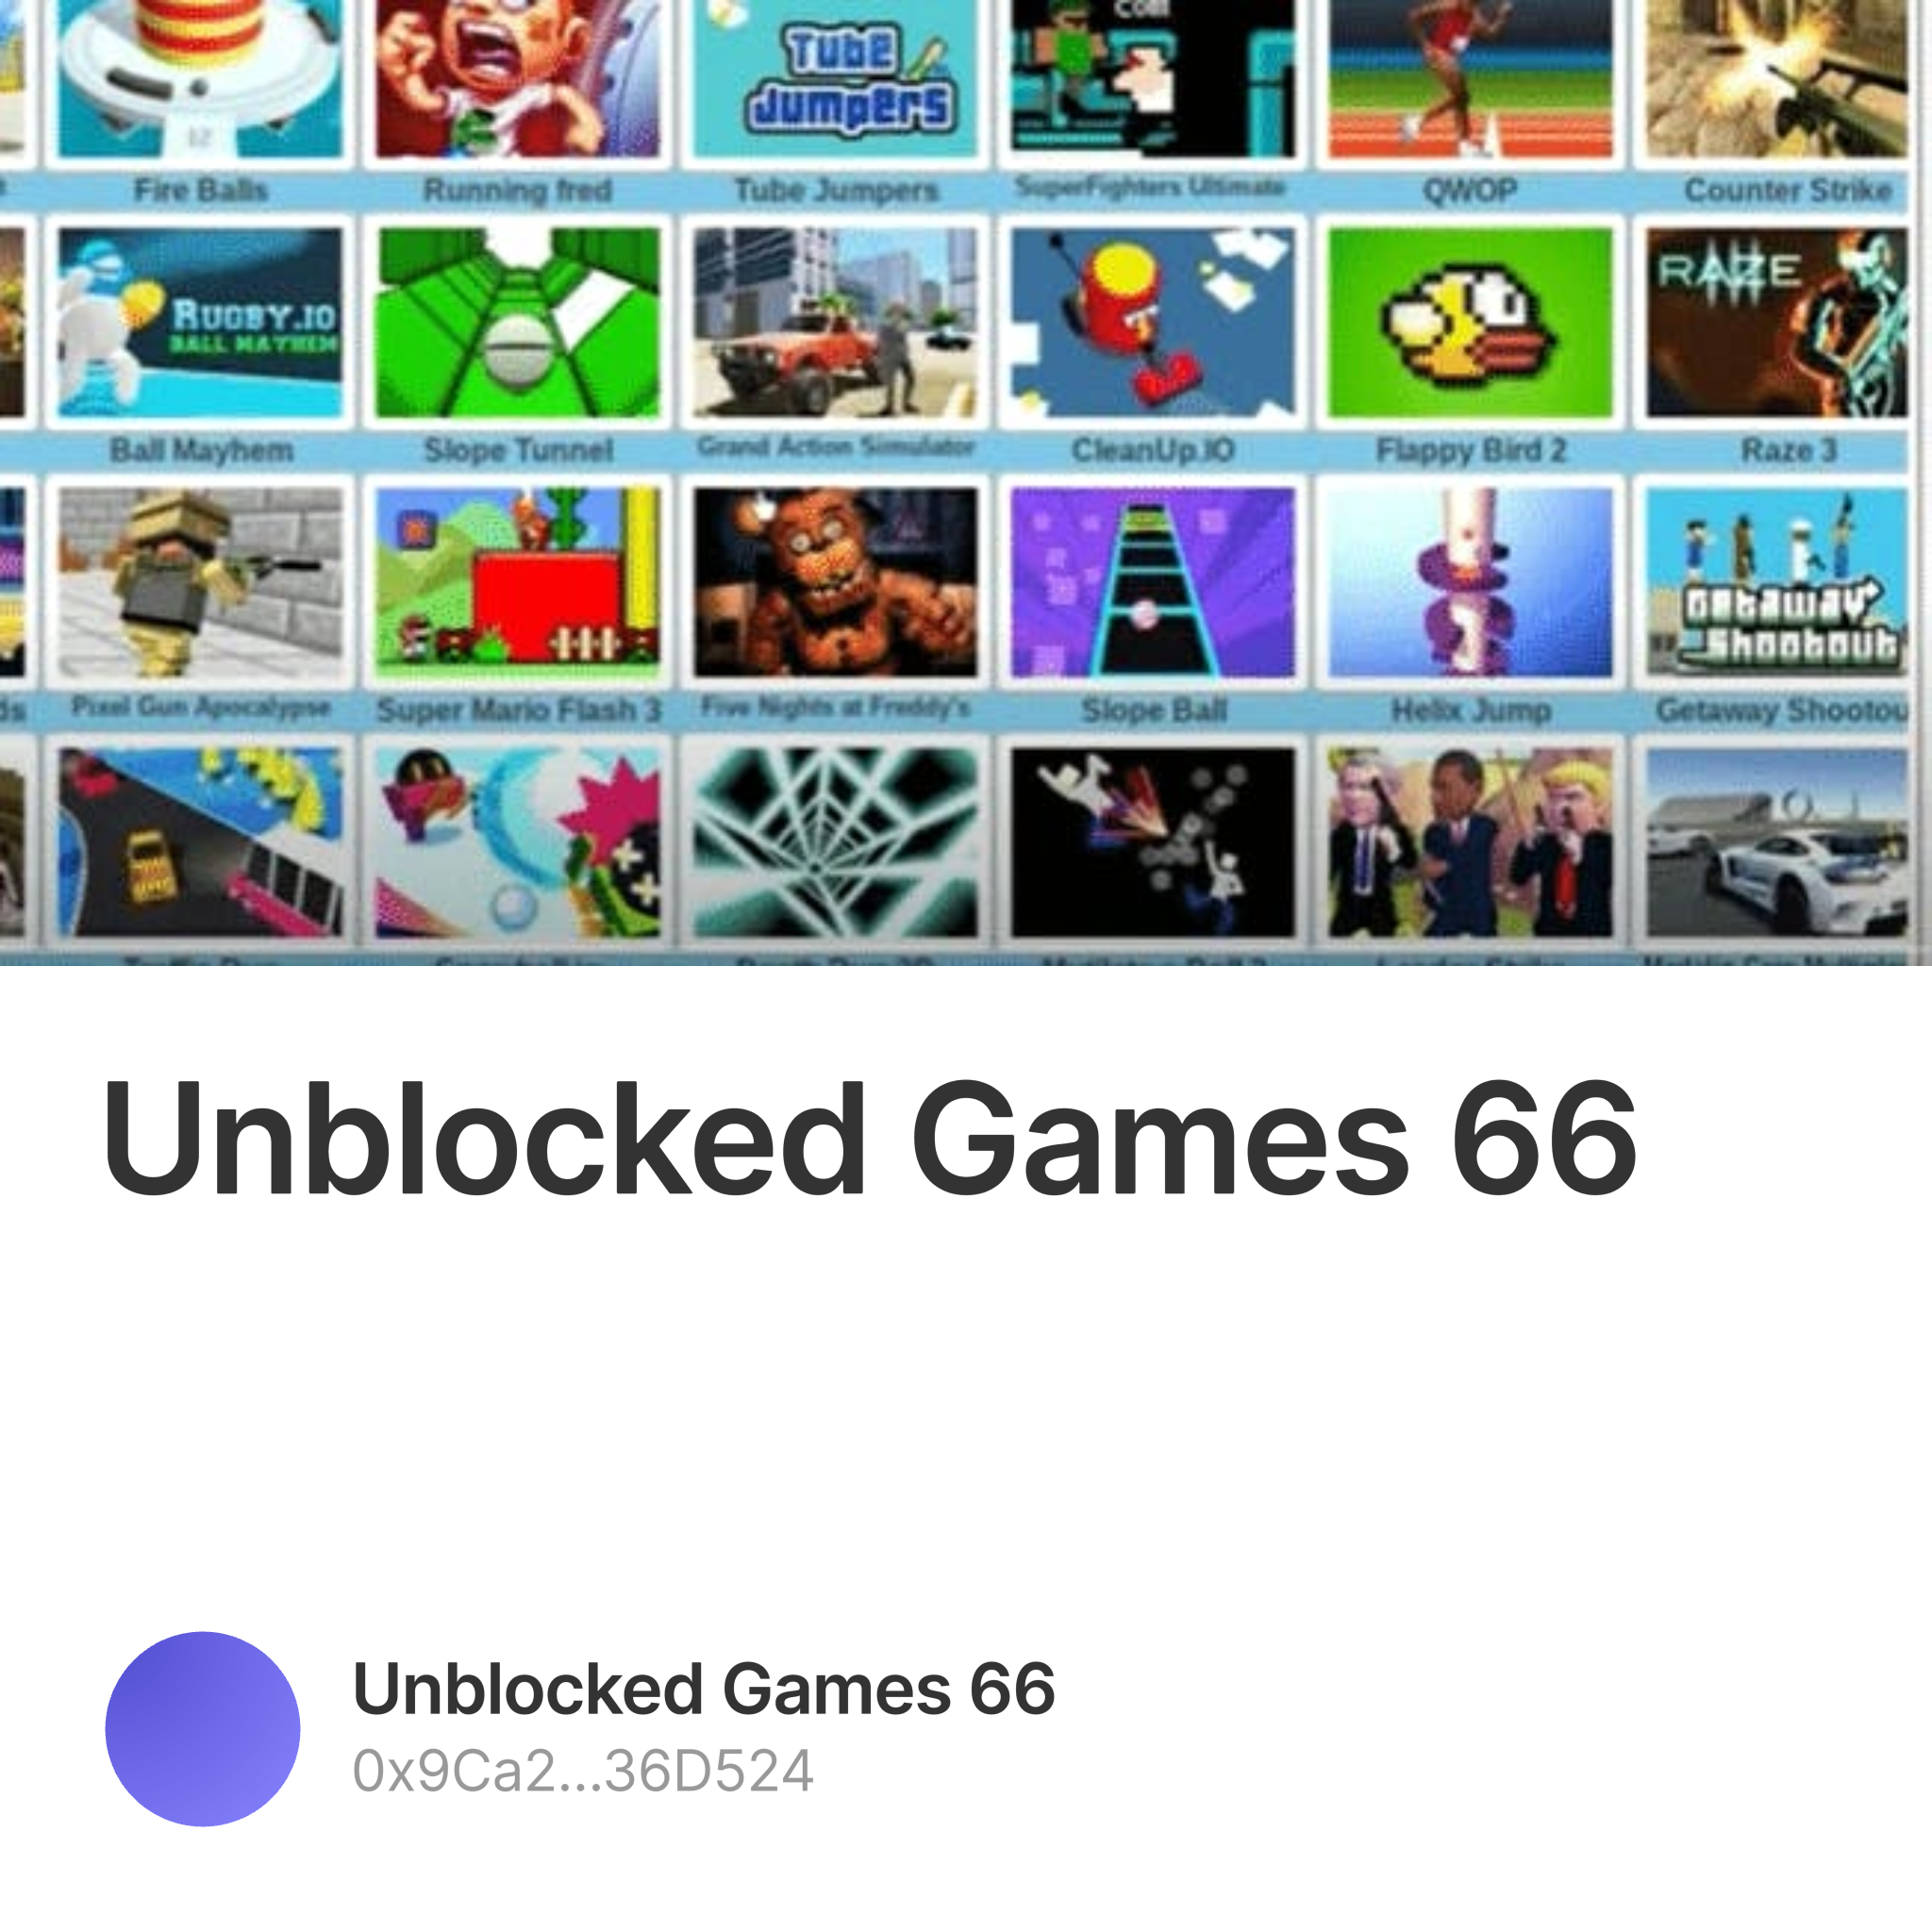 What are some unblocked games 66, 67, 69, 76, 77, 911 to play at school?